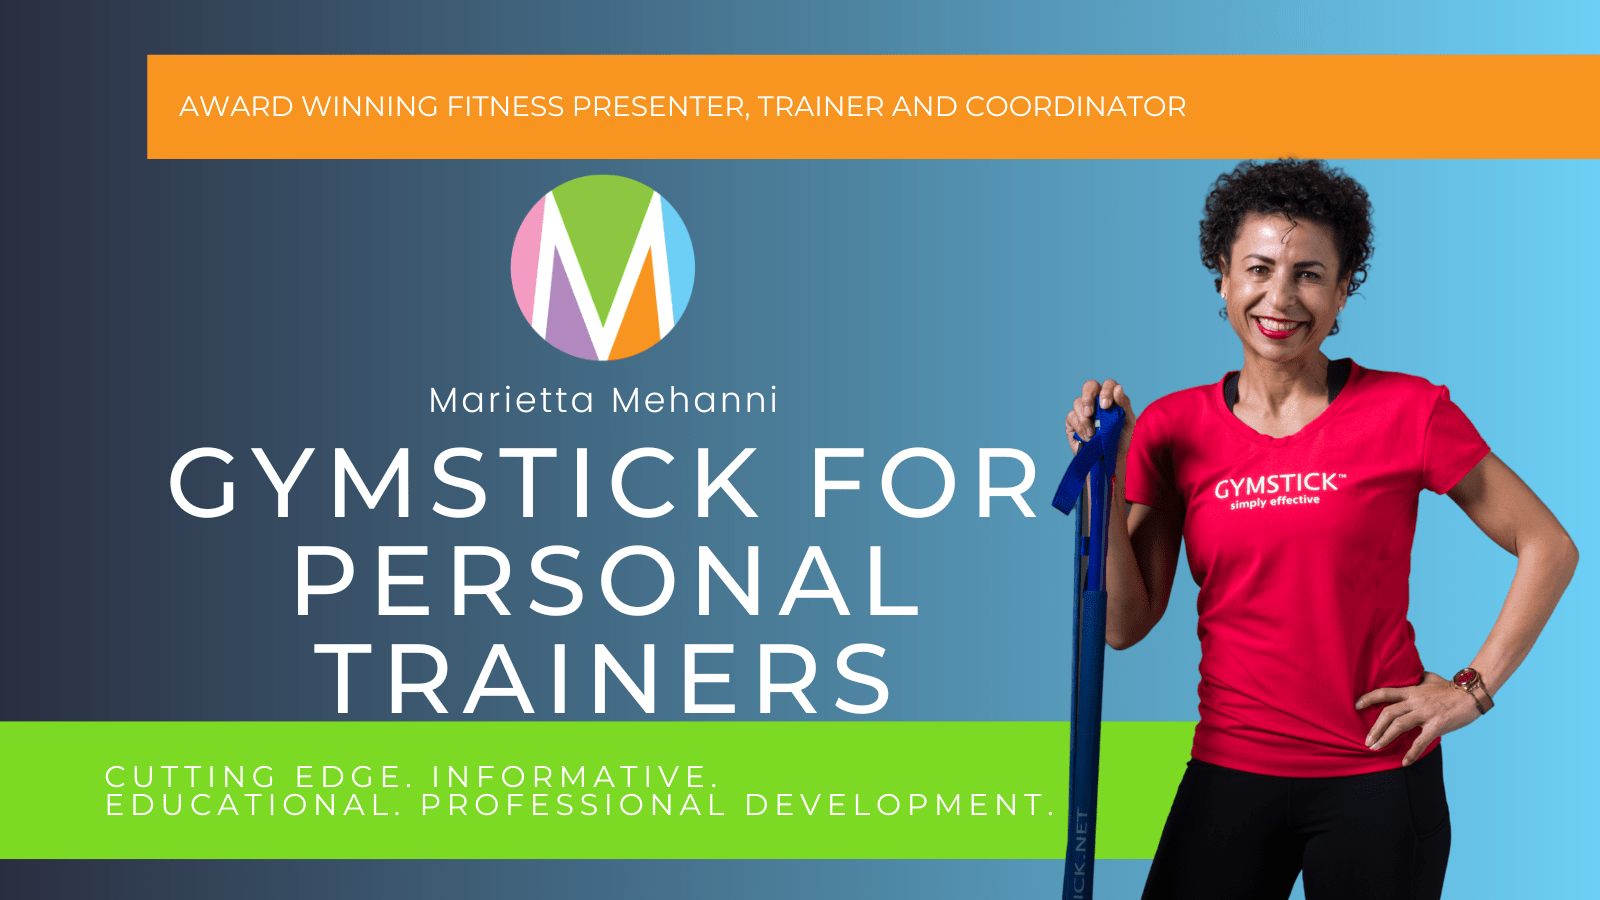 Gymstick for Personal Trainers. Marietta Mehanni, effective resistance training